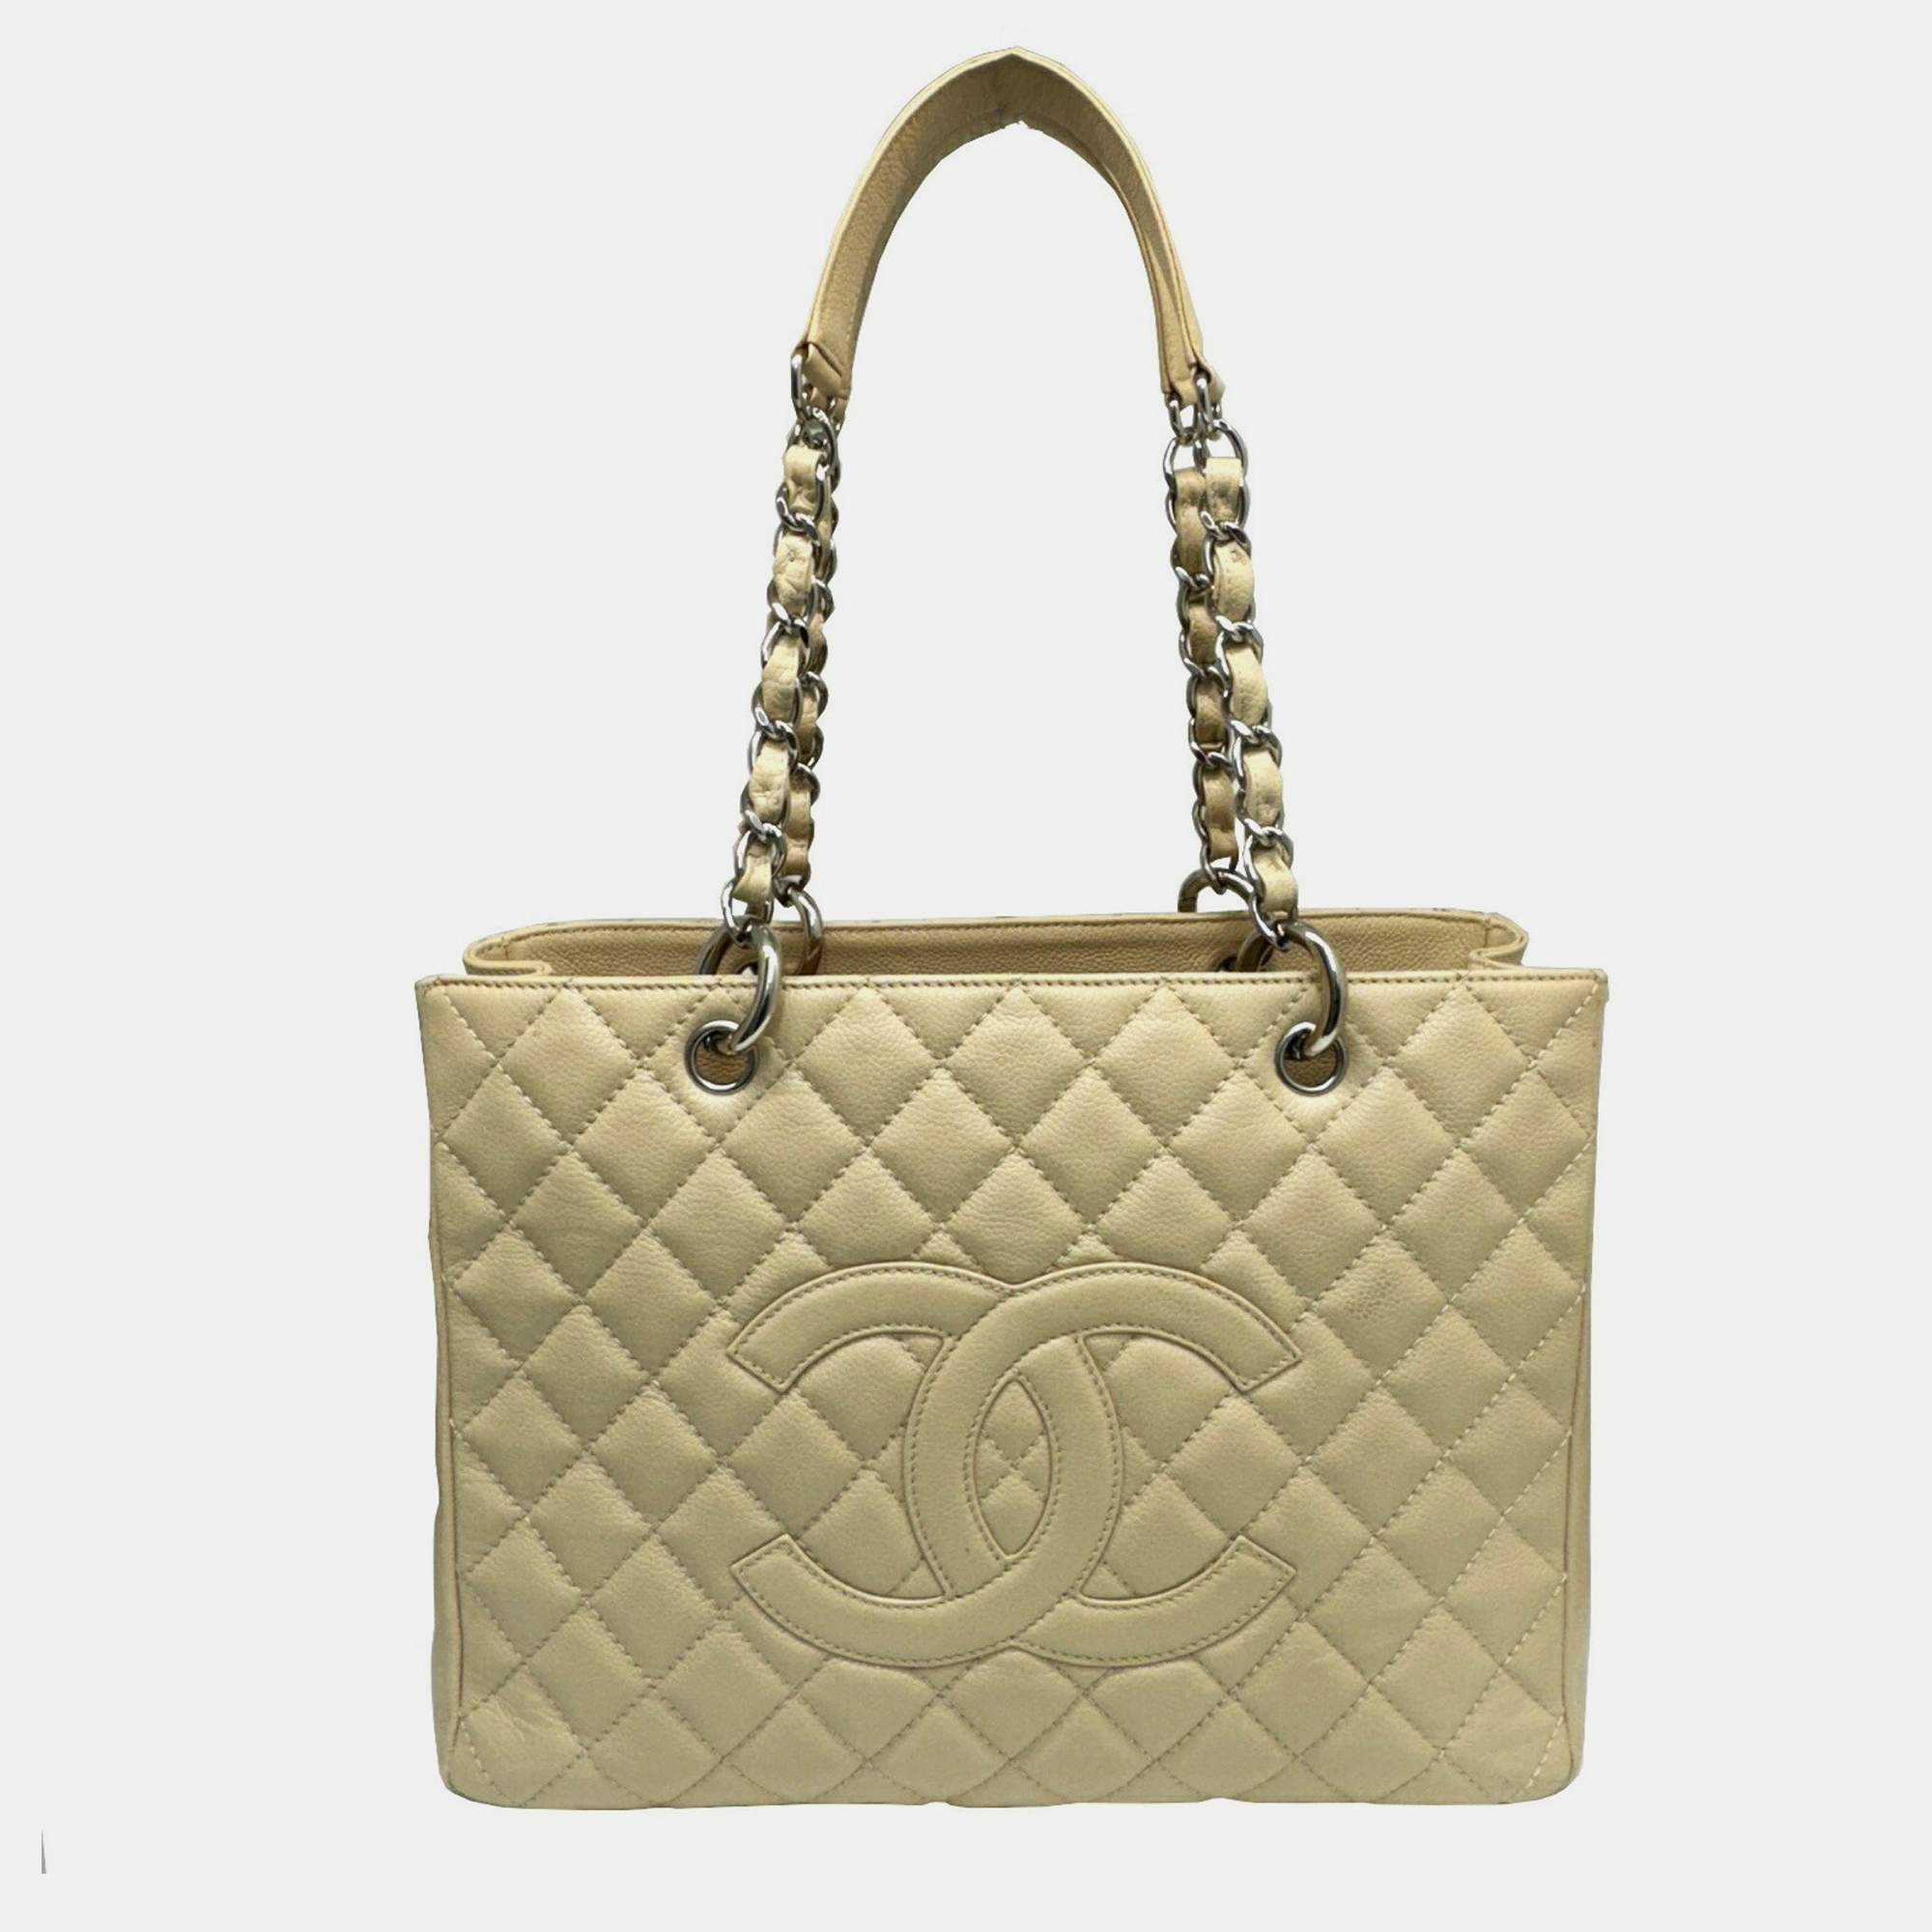 

Chanel Beige Caviar Leather Totes